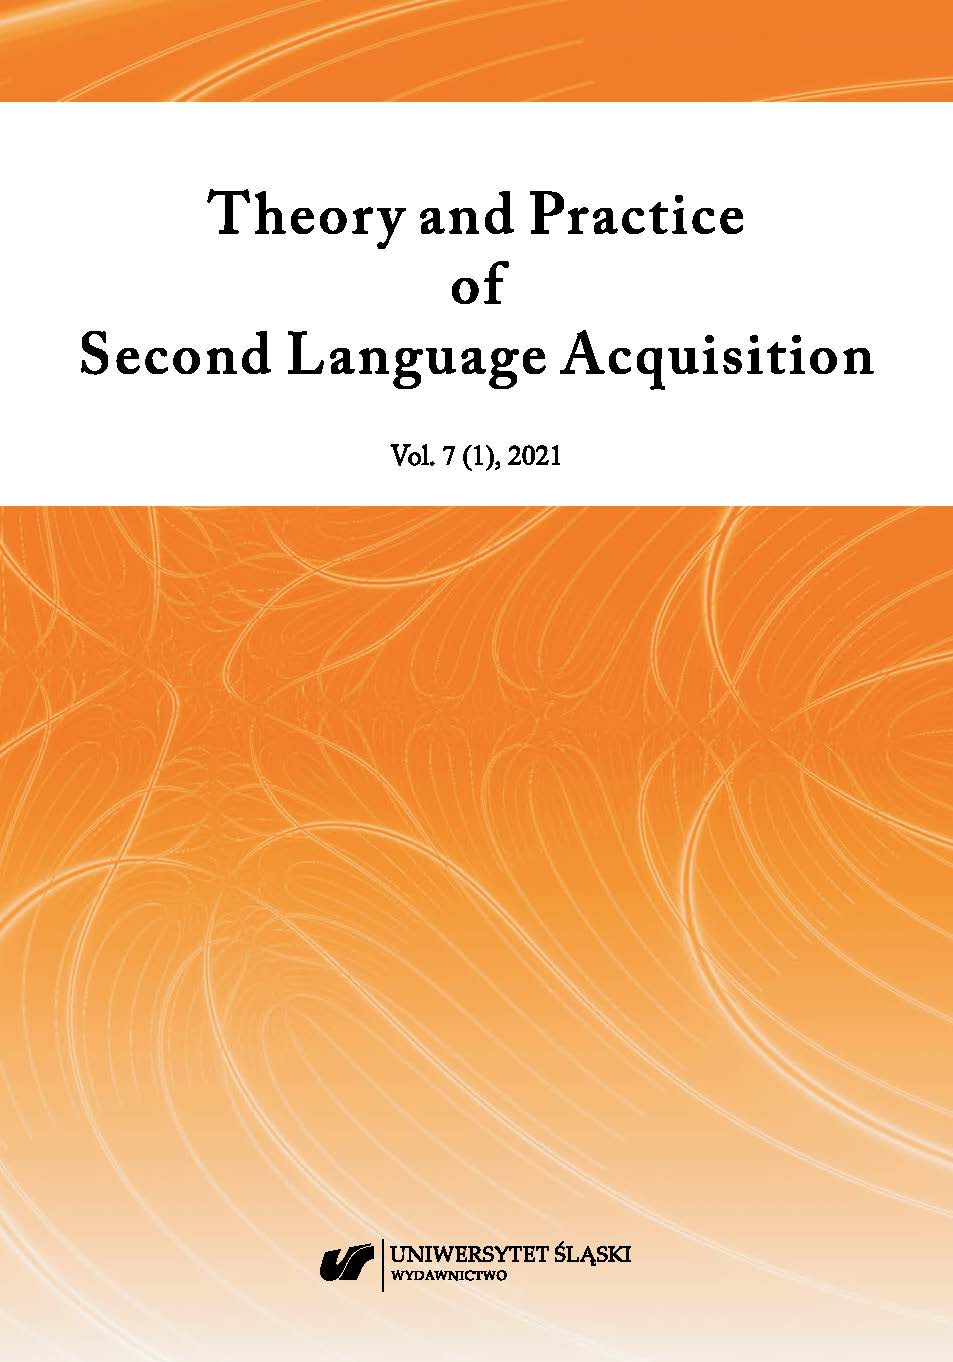 A Habermasian Approach to the Examination of Language Teachers’ Cognitive Interests